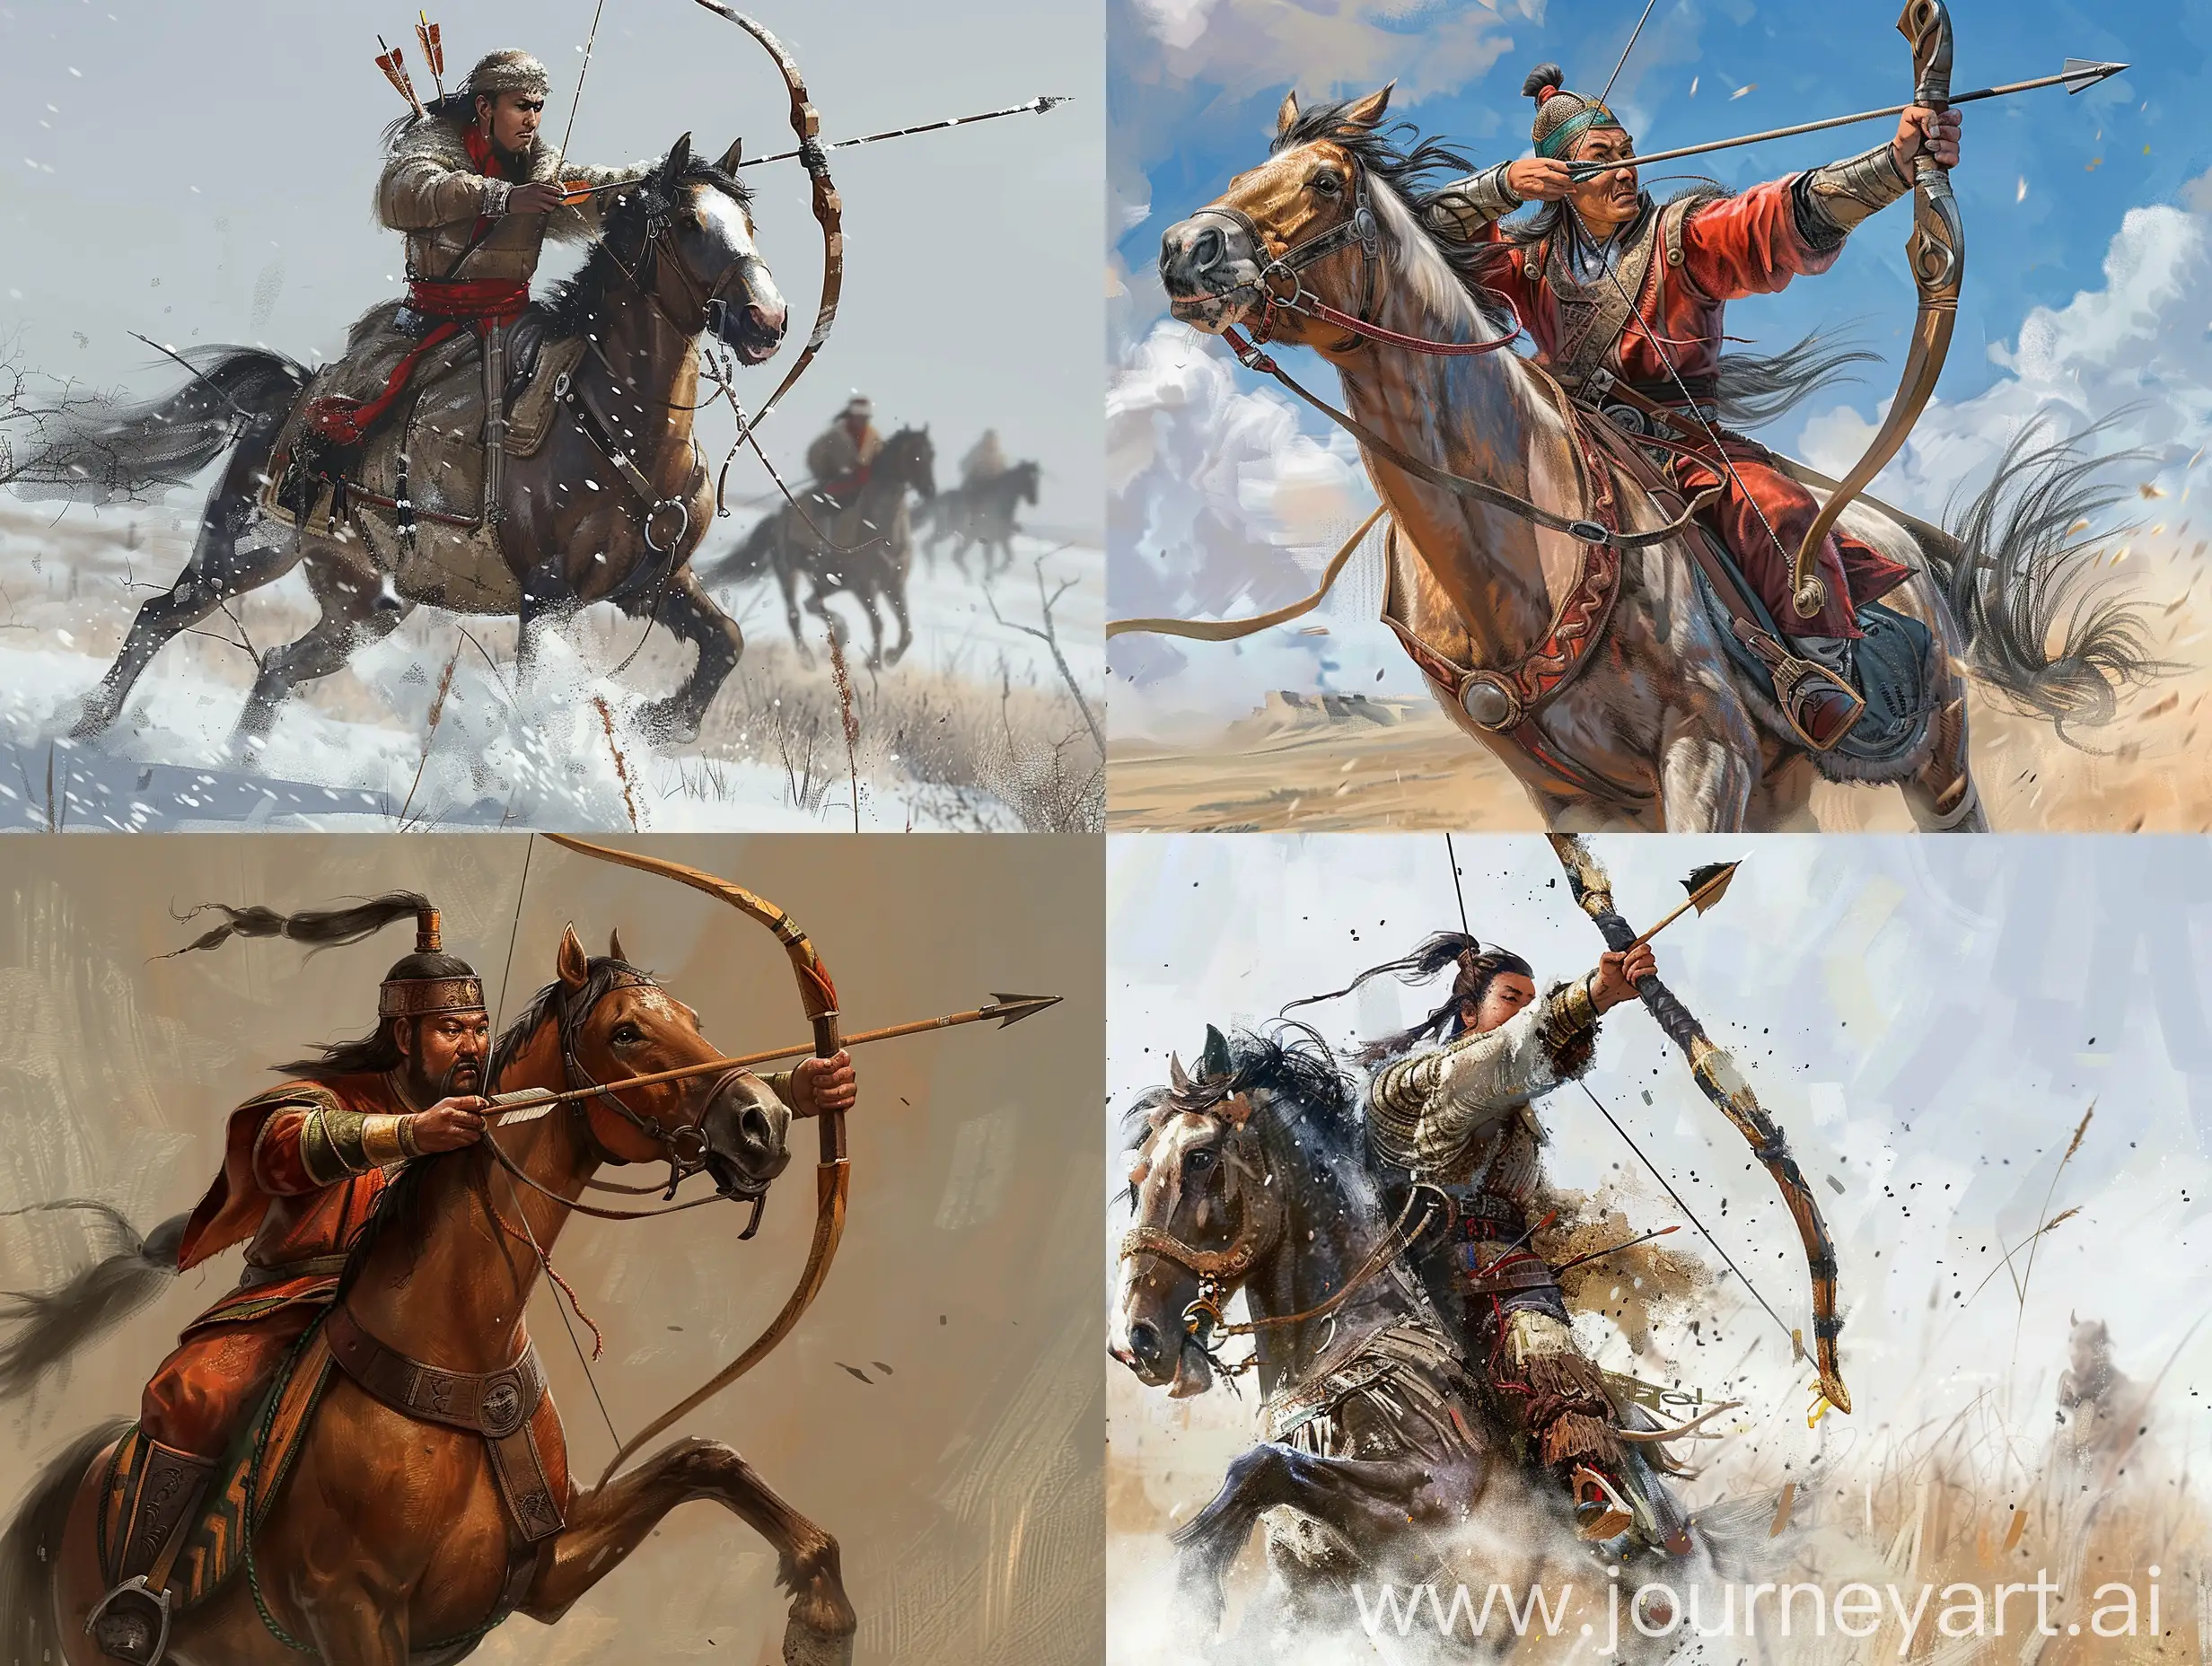 A Mongolian horse archer with 2.5d graphics.